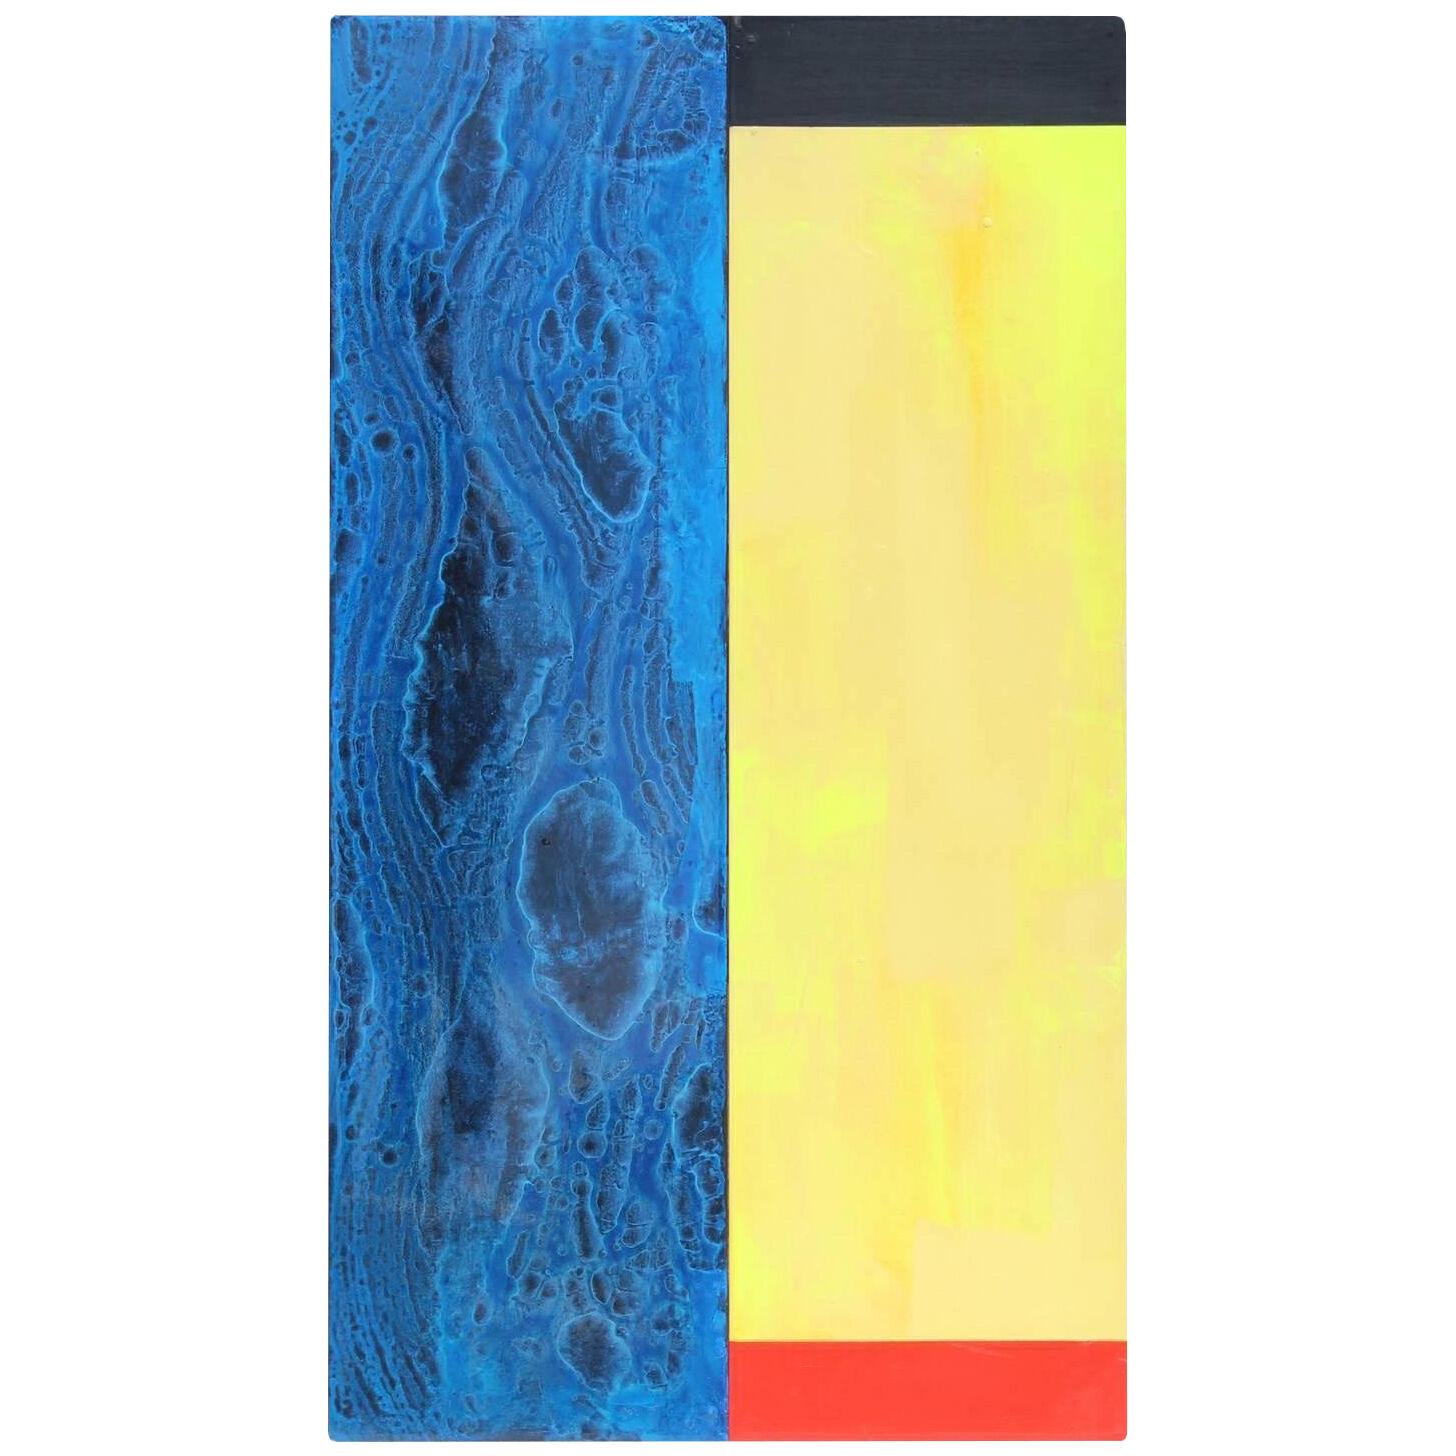 Michael Hollis Contemporary Minimal Blue and Yellow Abstract Painting 2007